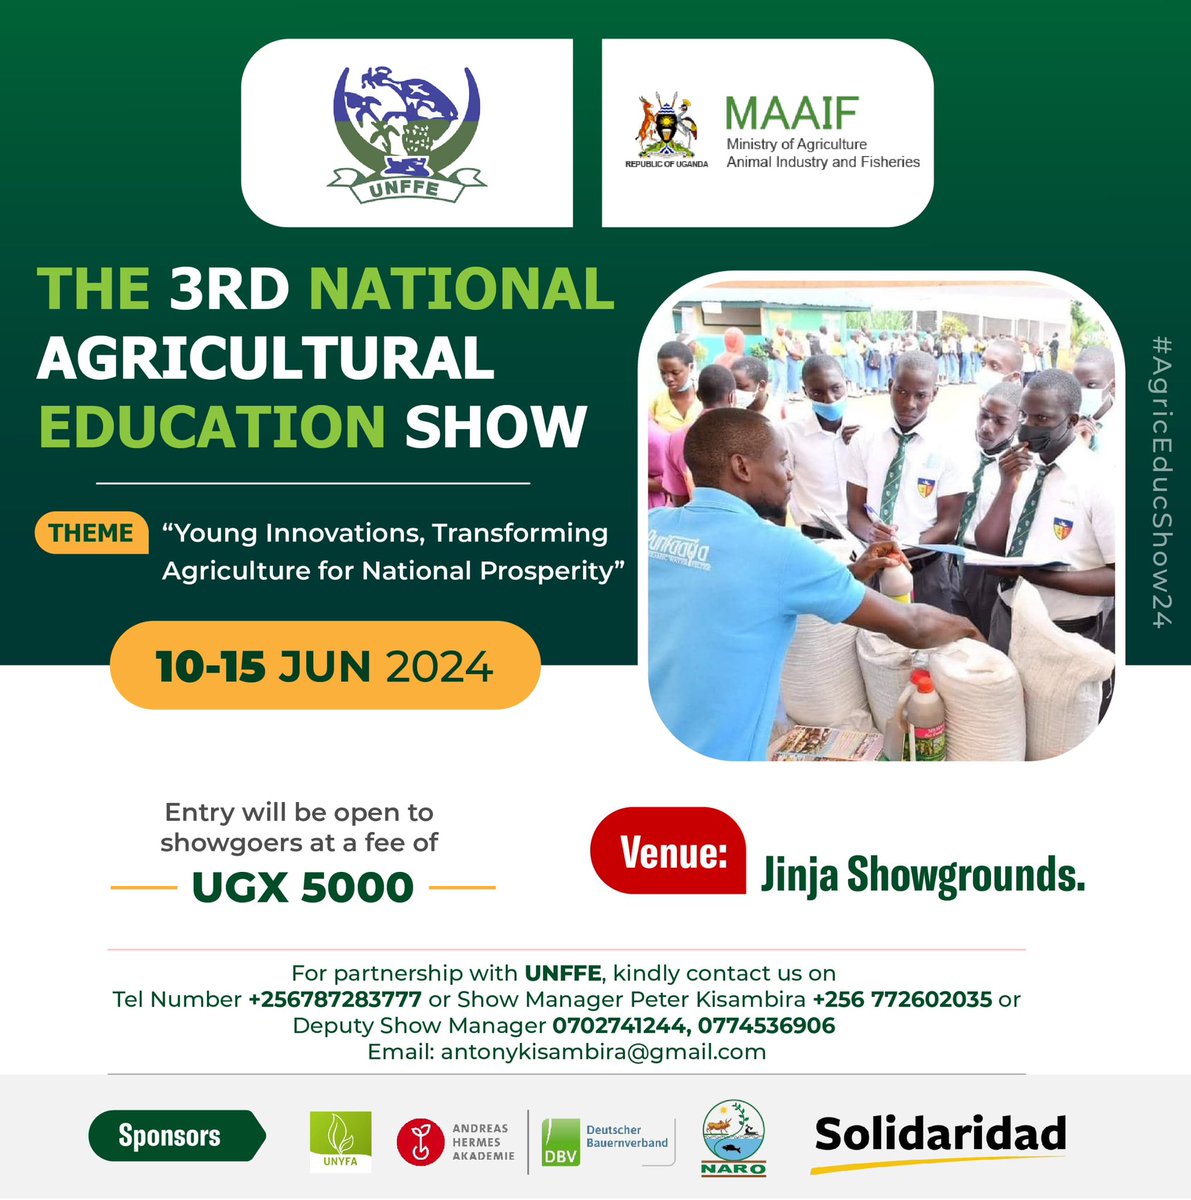 The ultimate goal for the National Agricultural Education Show is to contribute to a critical mass of young people fully motivated , knowledgeable, and skilled to take up the vast gainful opportunities in the agriculture sector of uganda. #AgricEducShow24